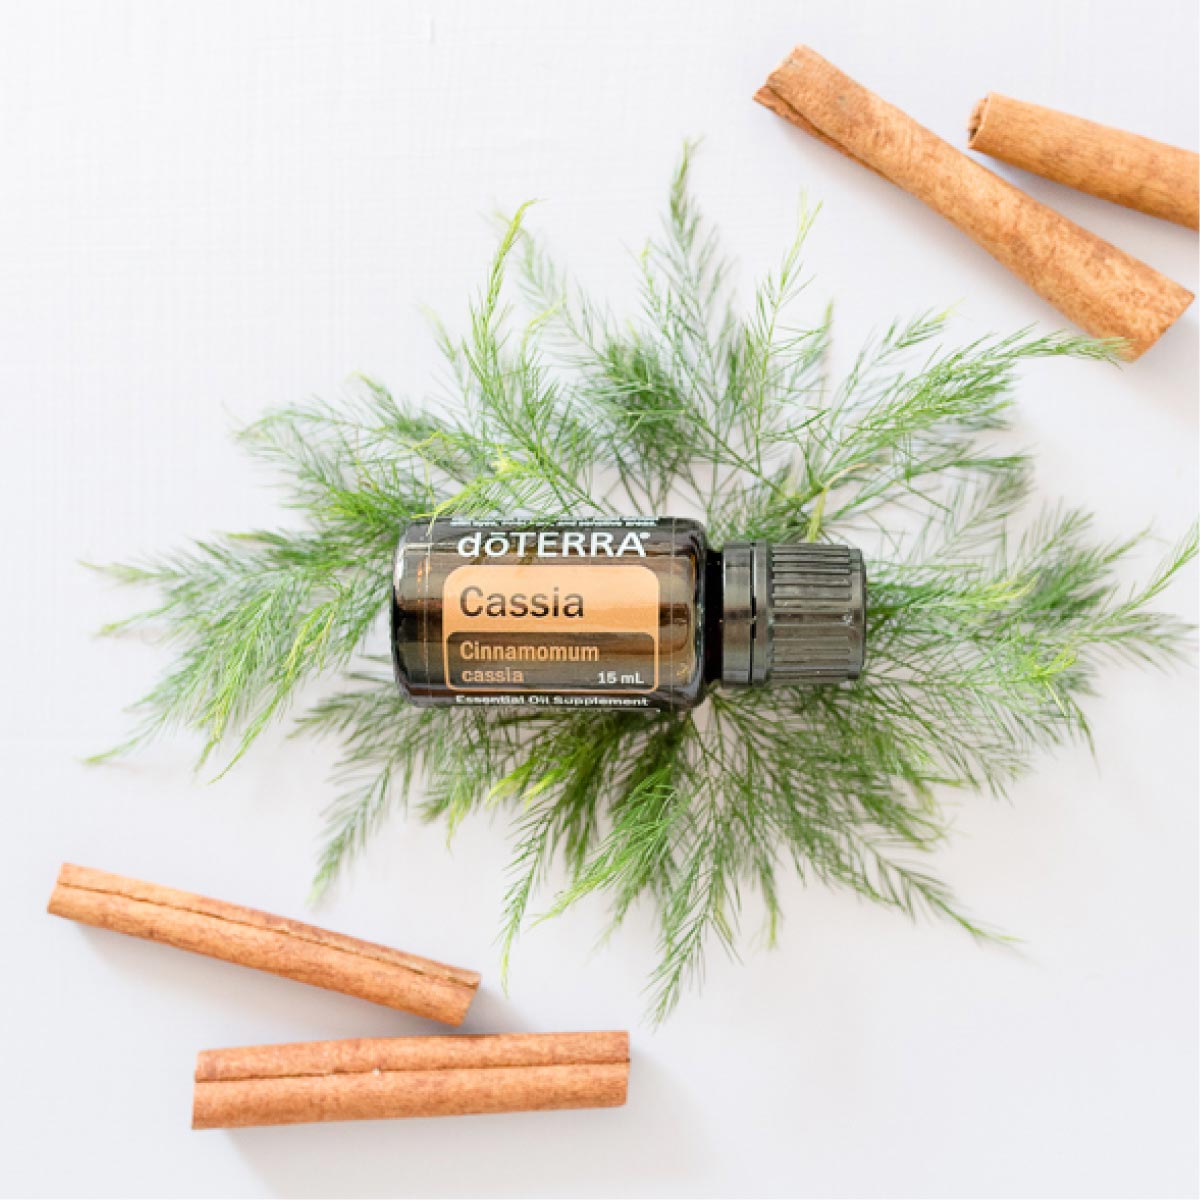 Bottle of doTERRA Cassia oil sitting on greens. What are the benefits of Cassia oil? Cassia essential oil has benefits for the digestive system, immune system, and mood, and can also be used to add flavor when cooking.